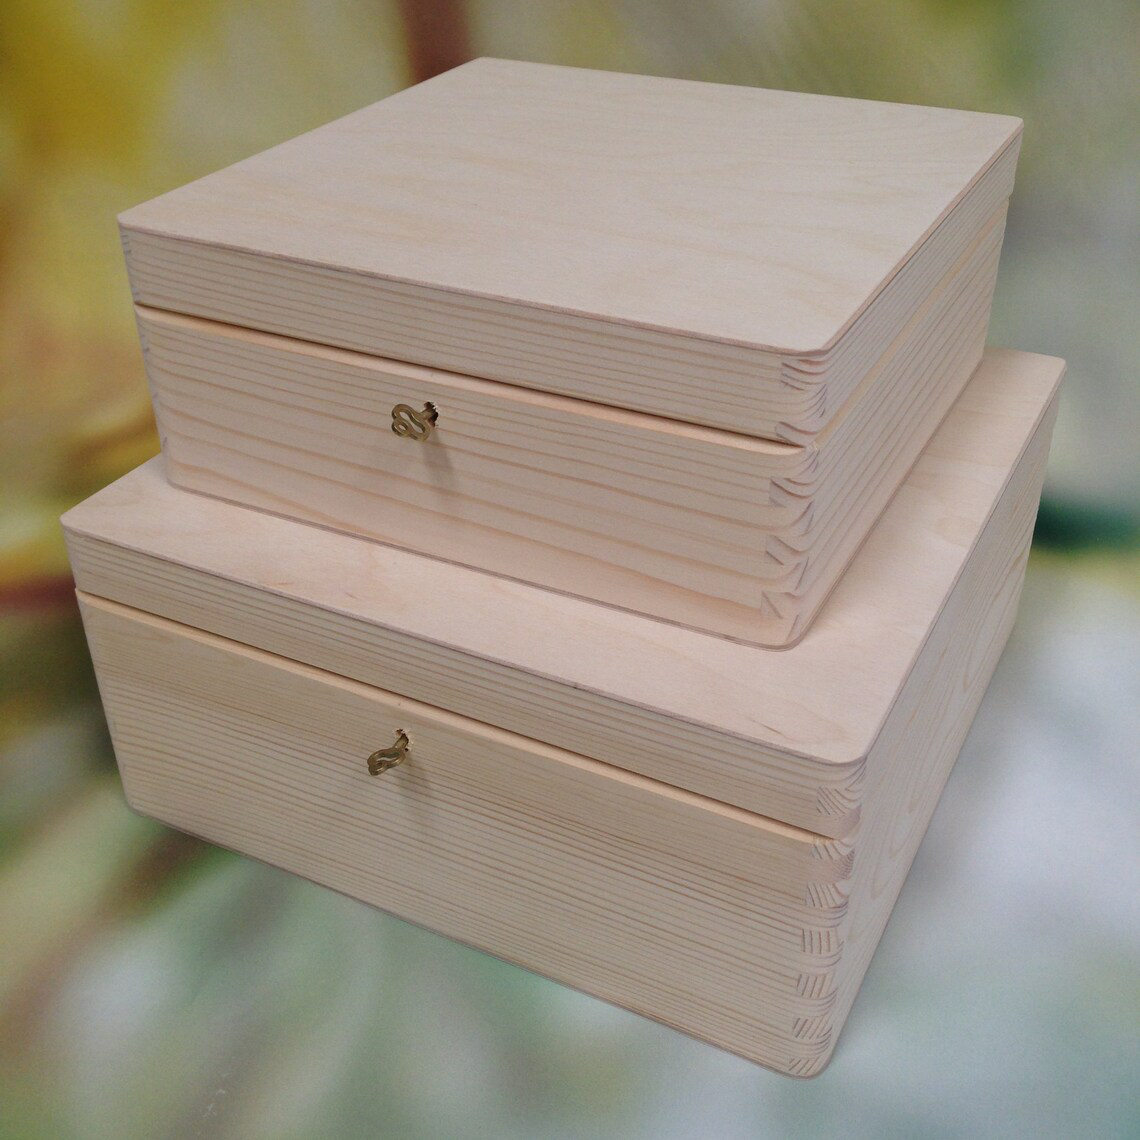 Lockable Natural Wooden Box With Lid - Both Options